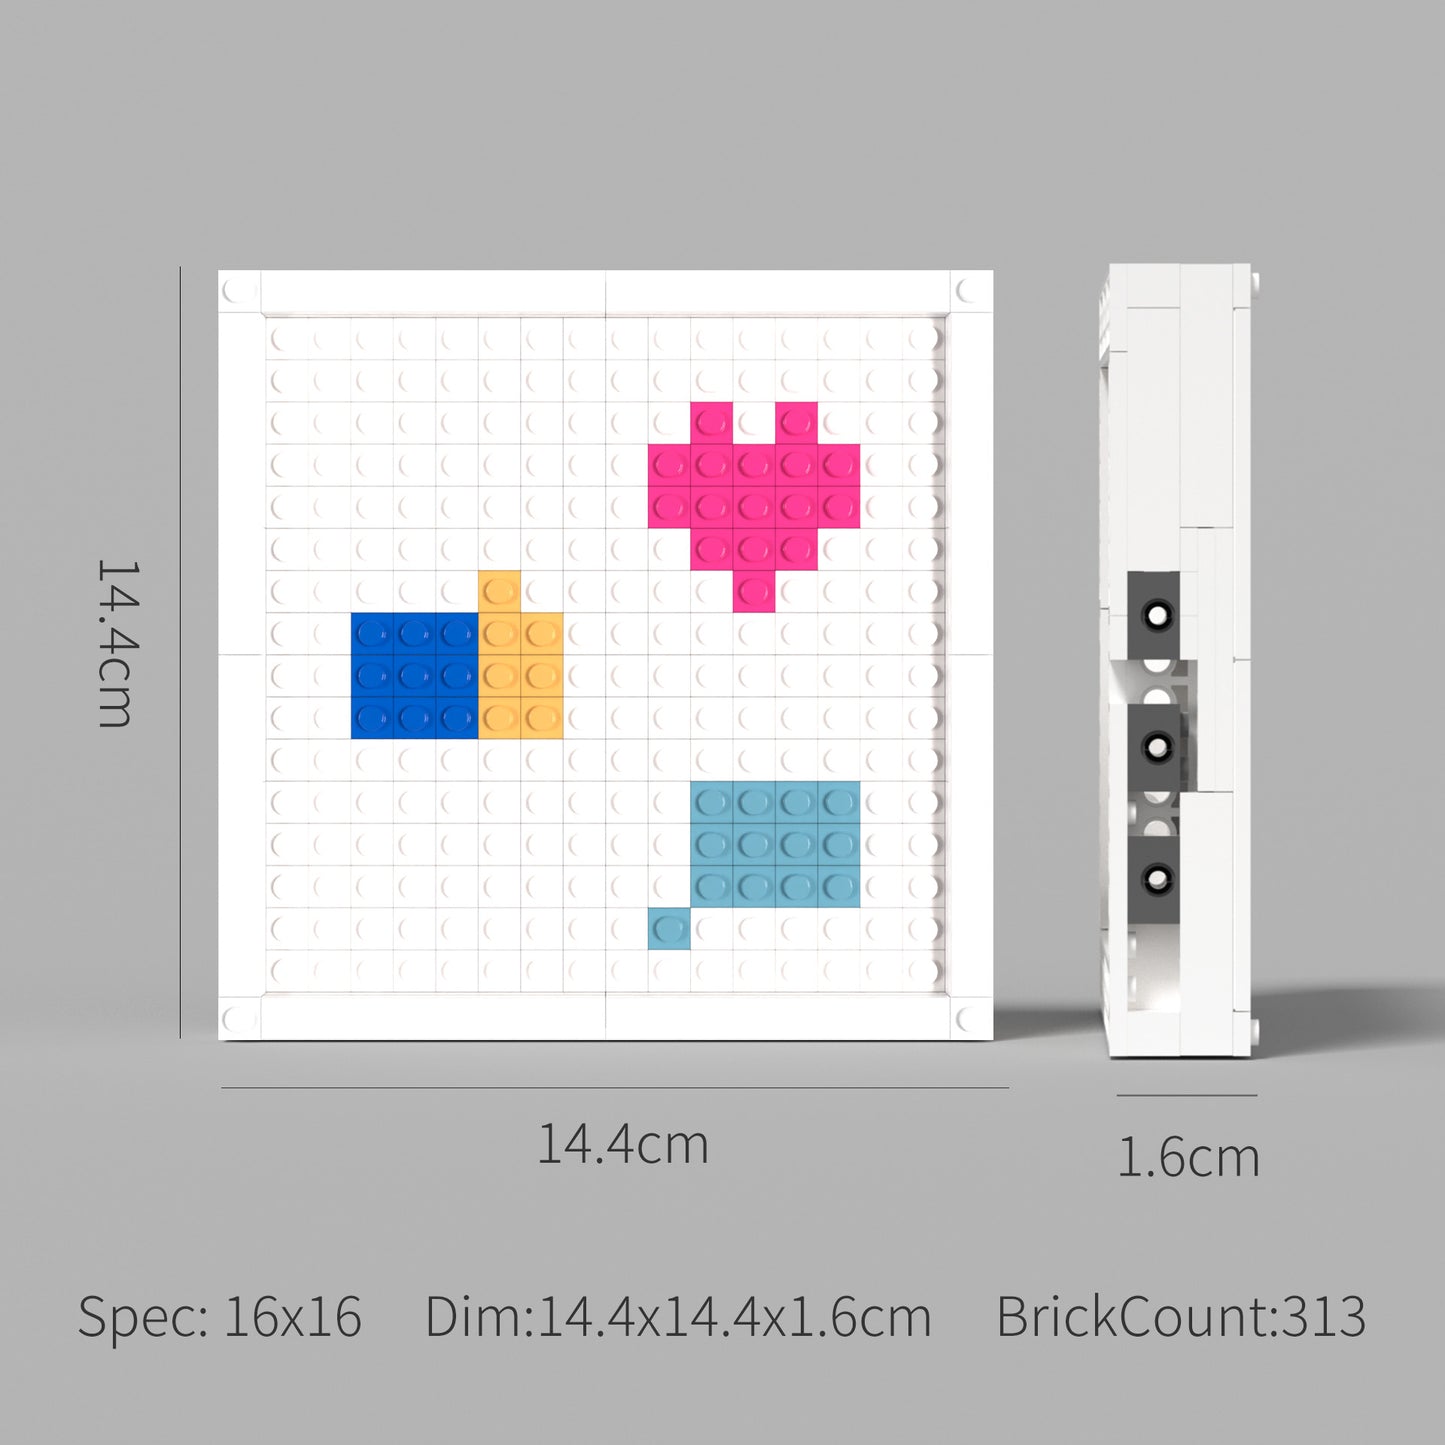 Pixel Art of Like, Favorite and Comment Compatible Lego Set - An Interactive Social Media Theme Decoration